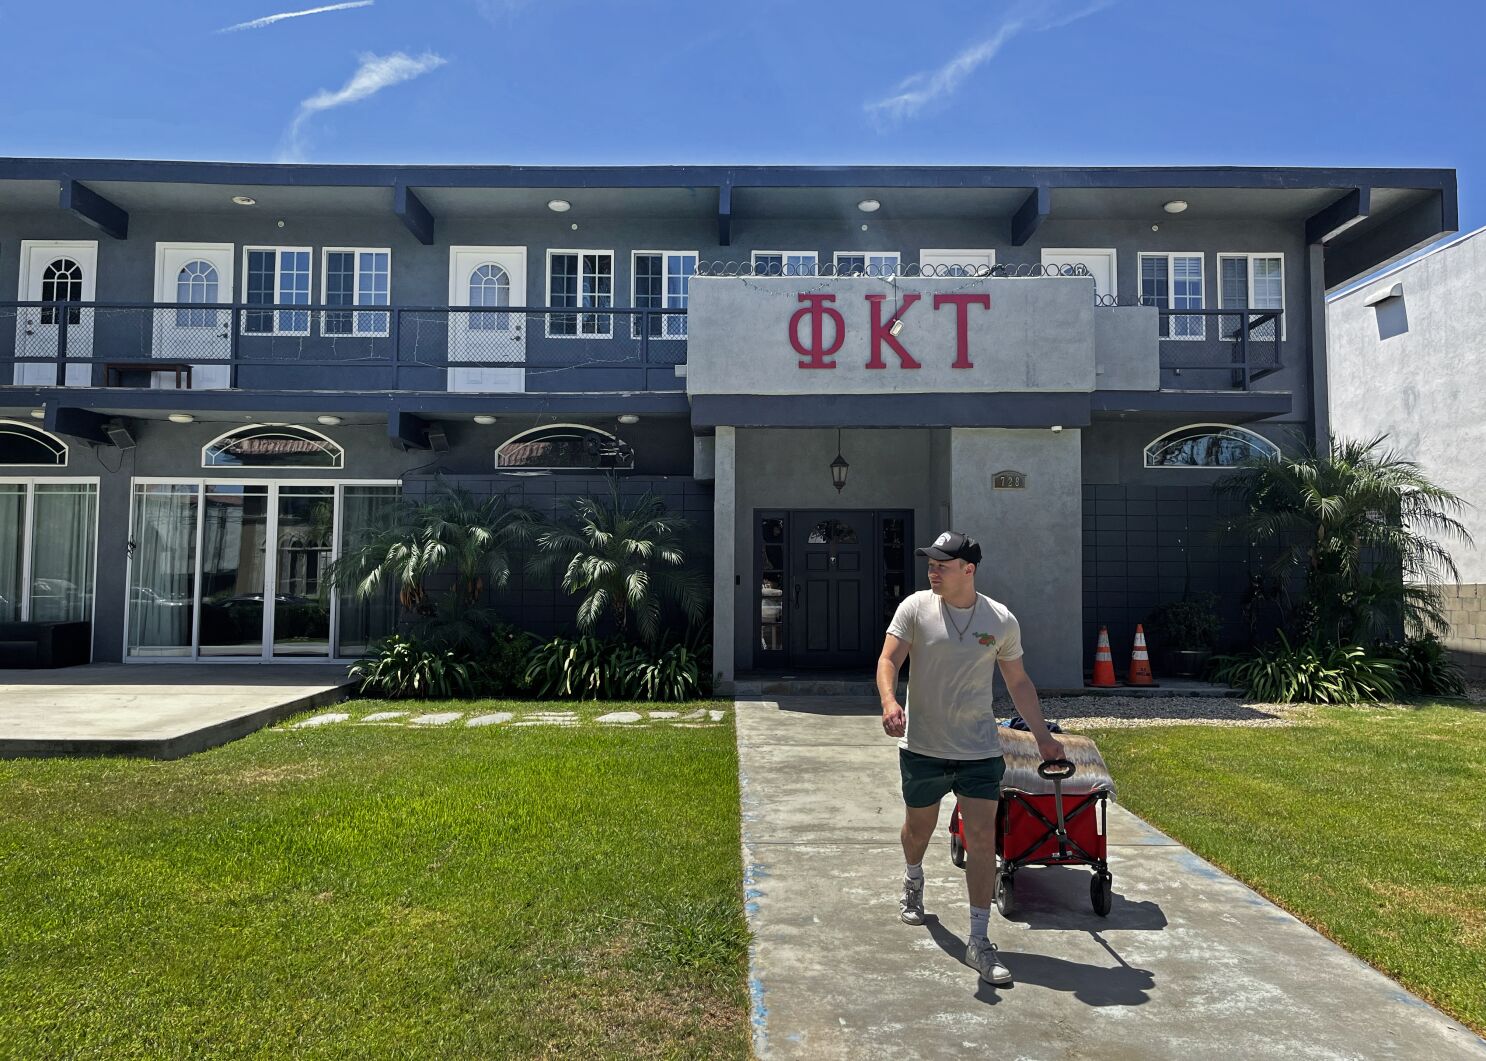 Six USC fraternities to school's party rules - Los Angeles